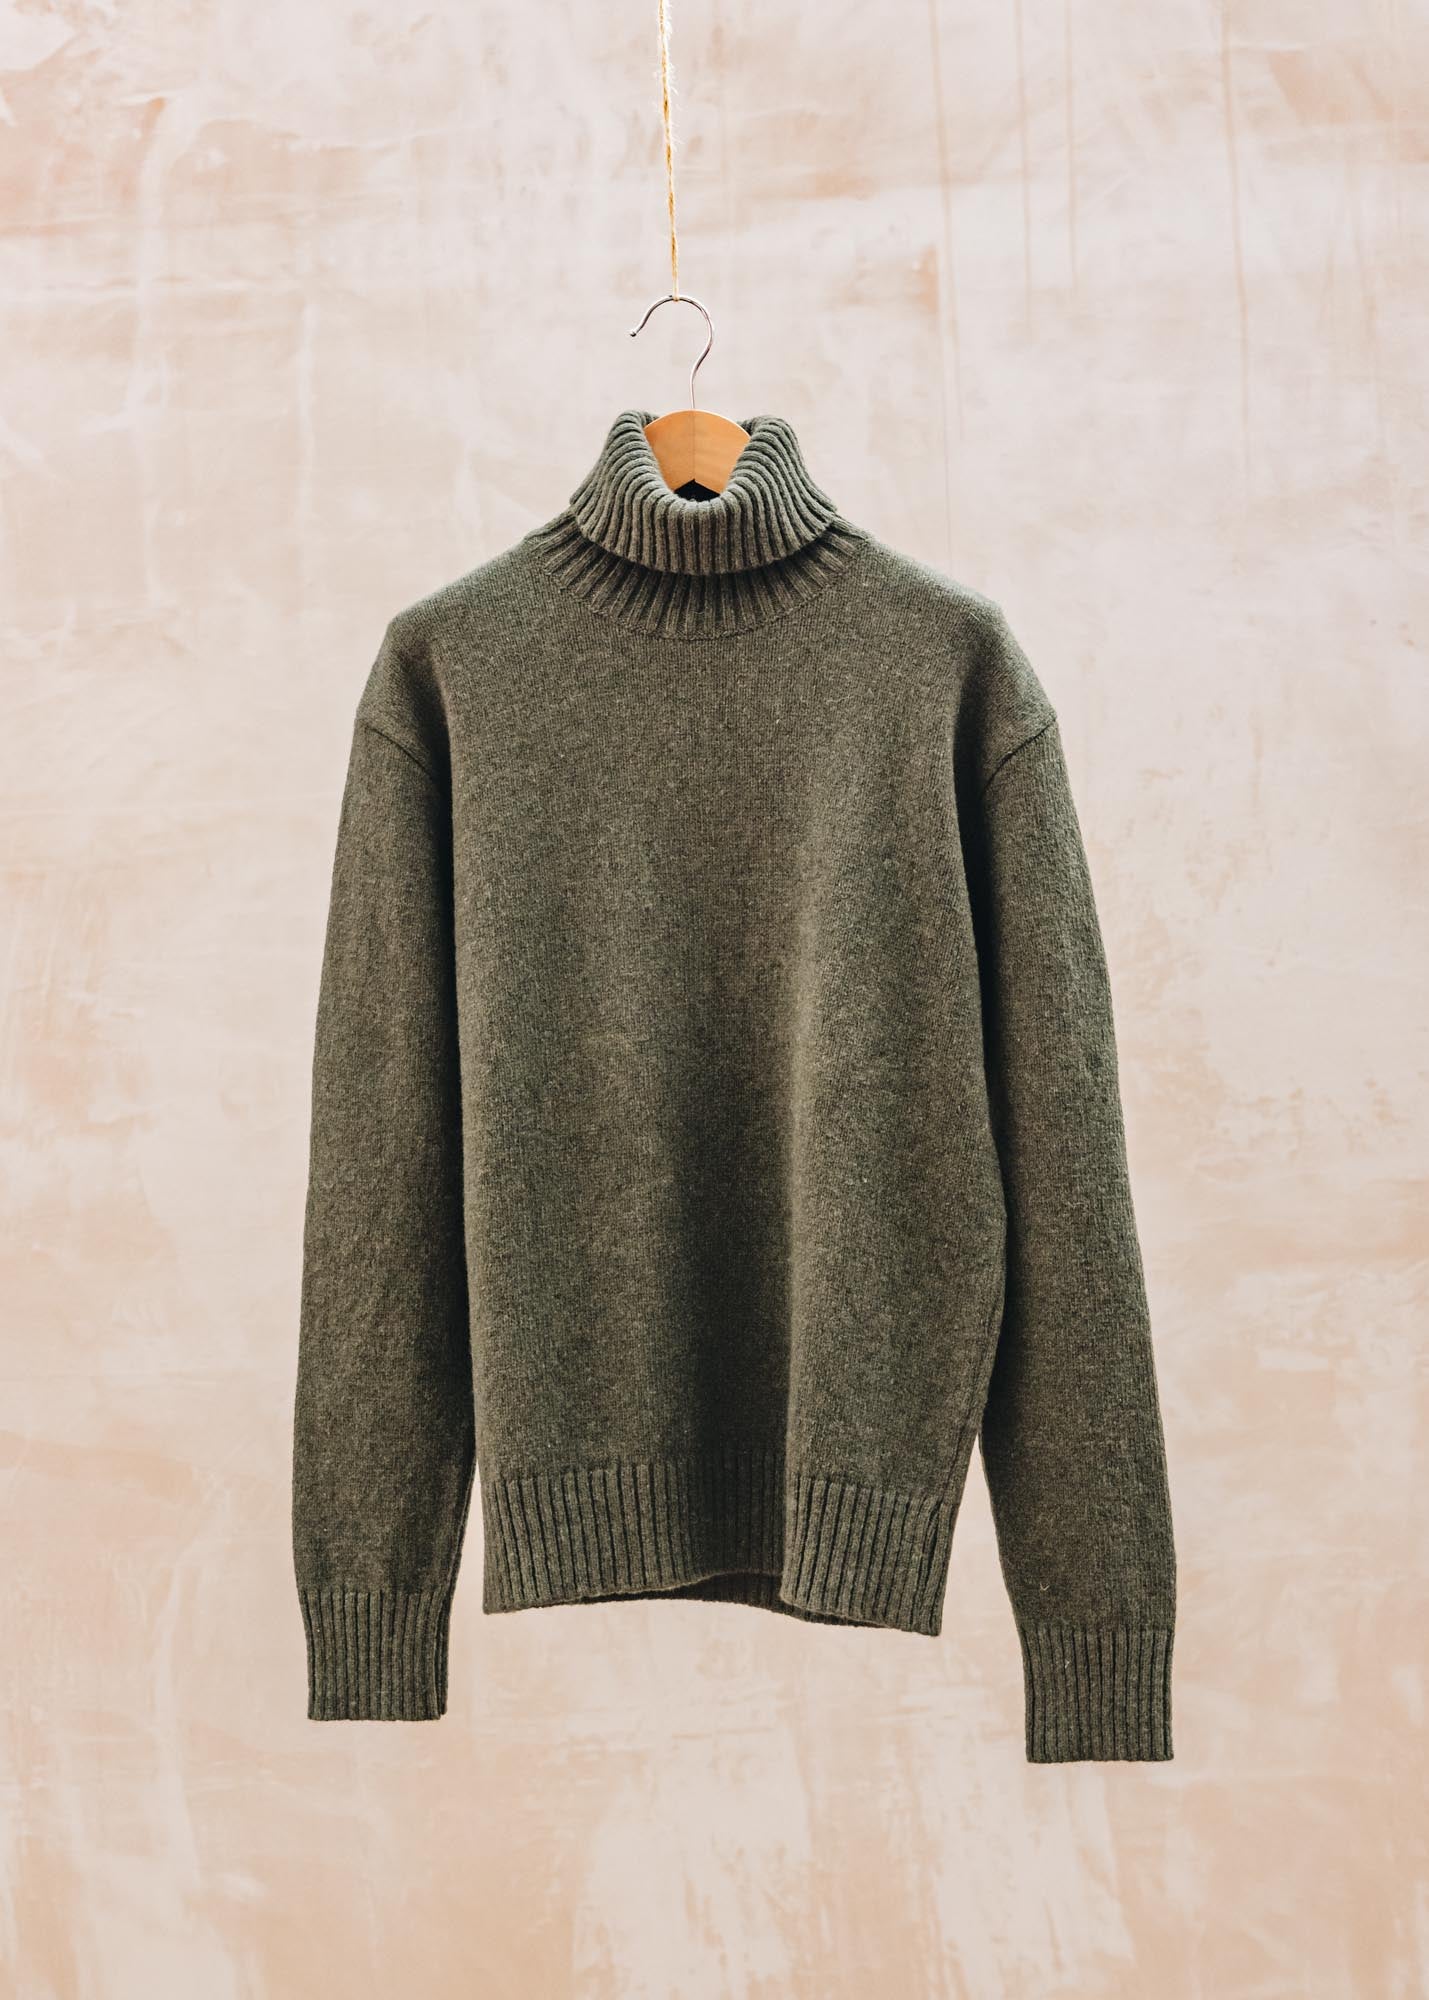 Universal Works Eco Wool Roll Neck Jumper in Olive